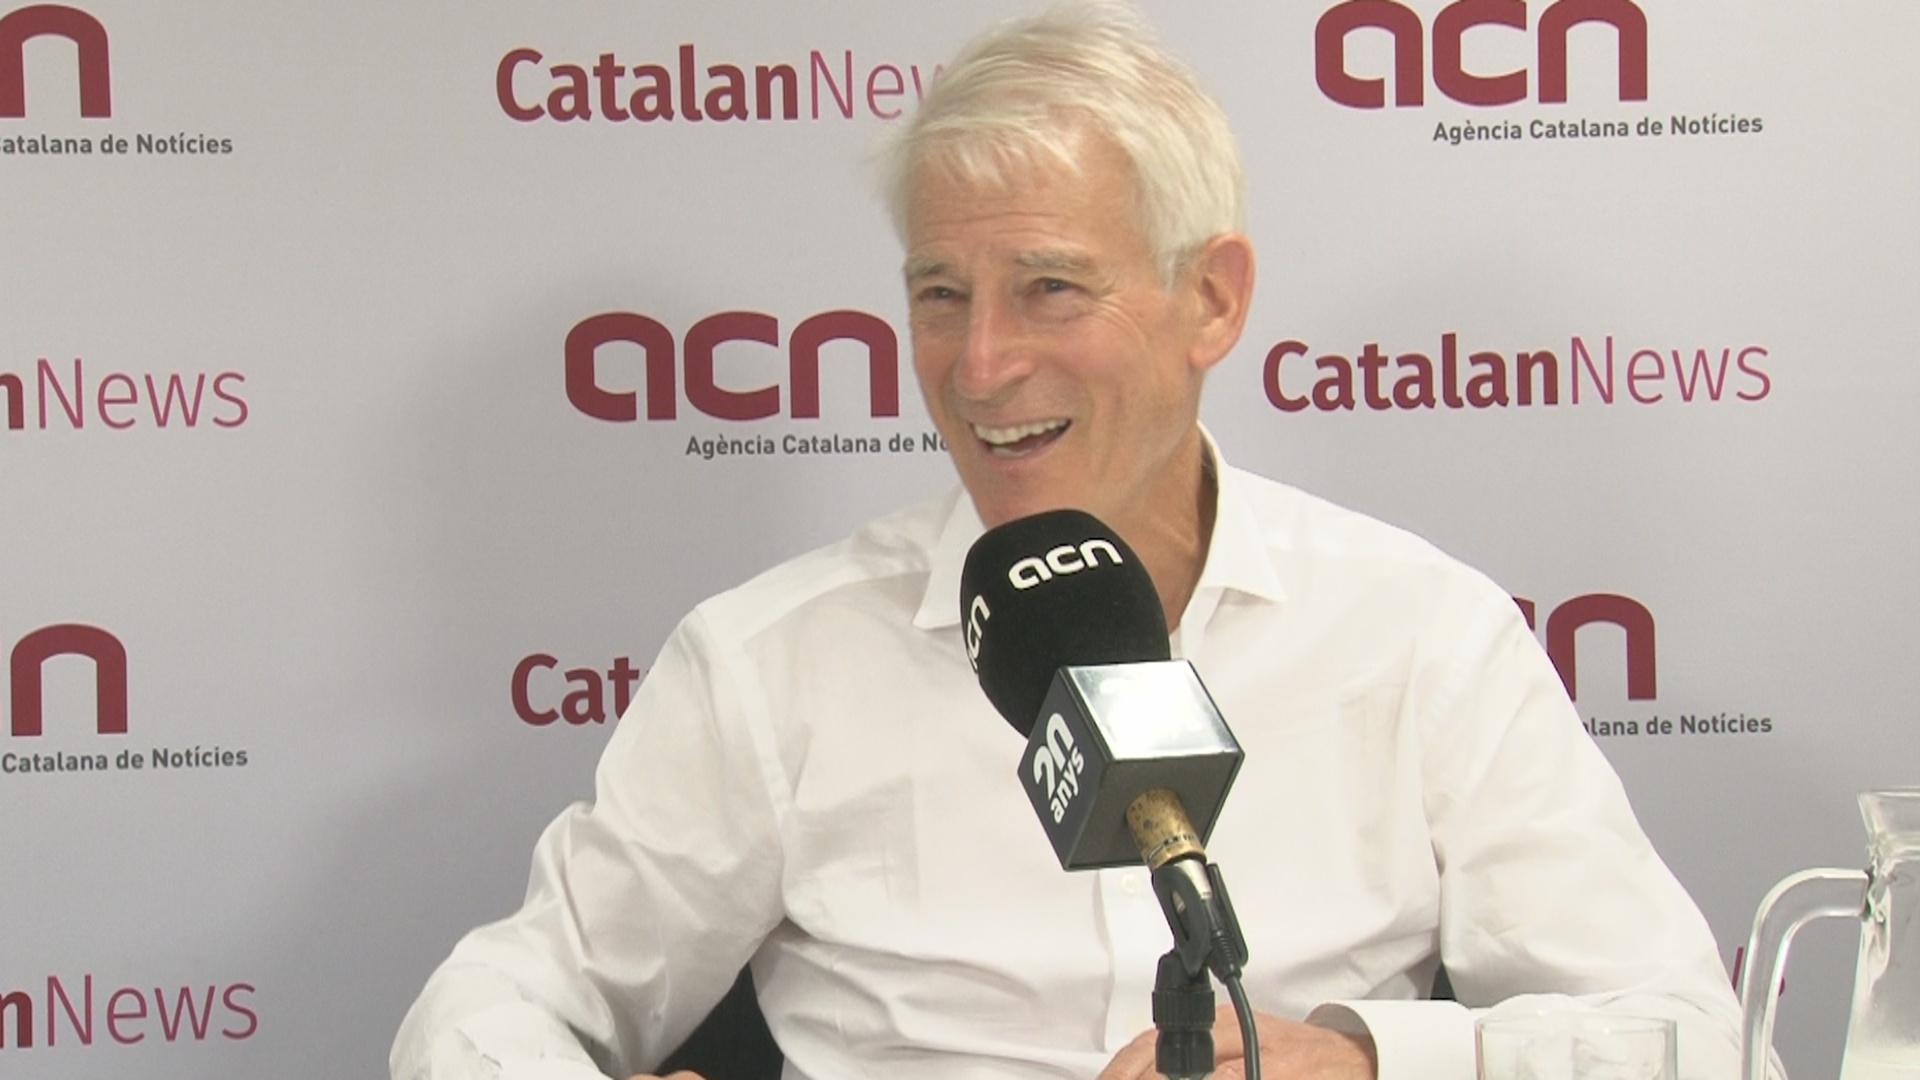 Polyglot Steve Kaufmann during an interview with the Catalan News Agency (by Alicia Egorov)